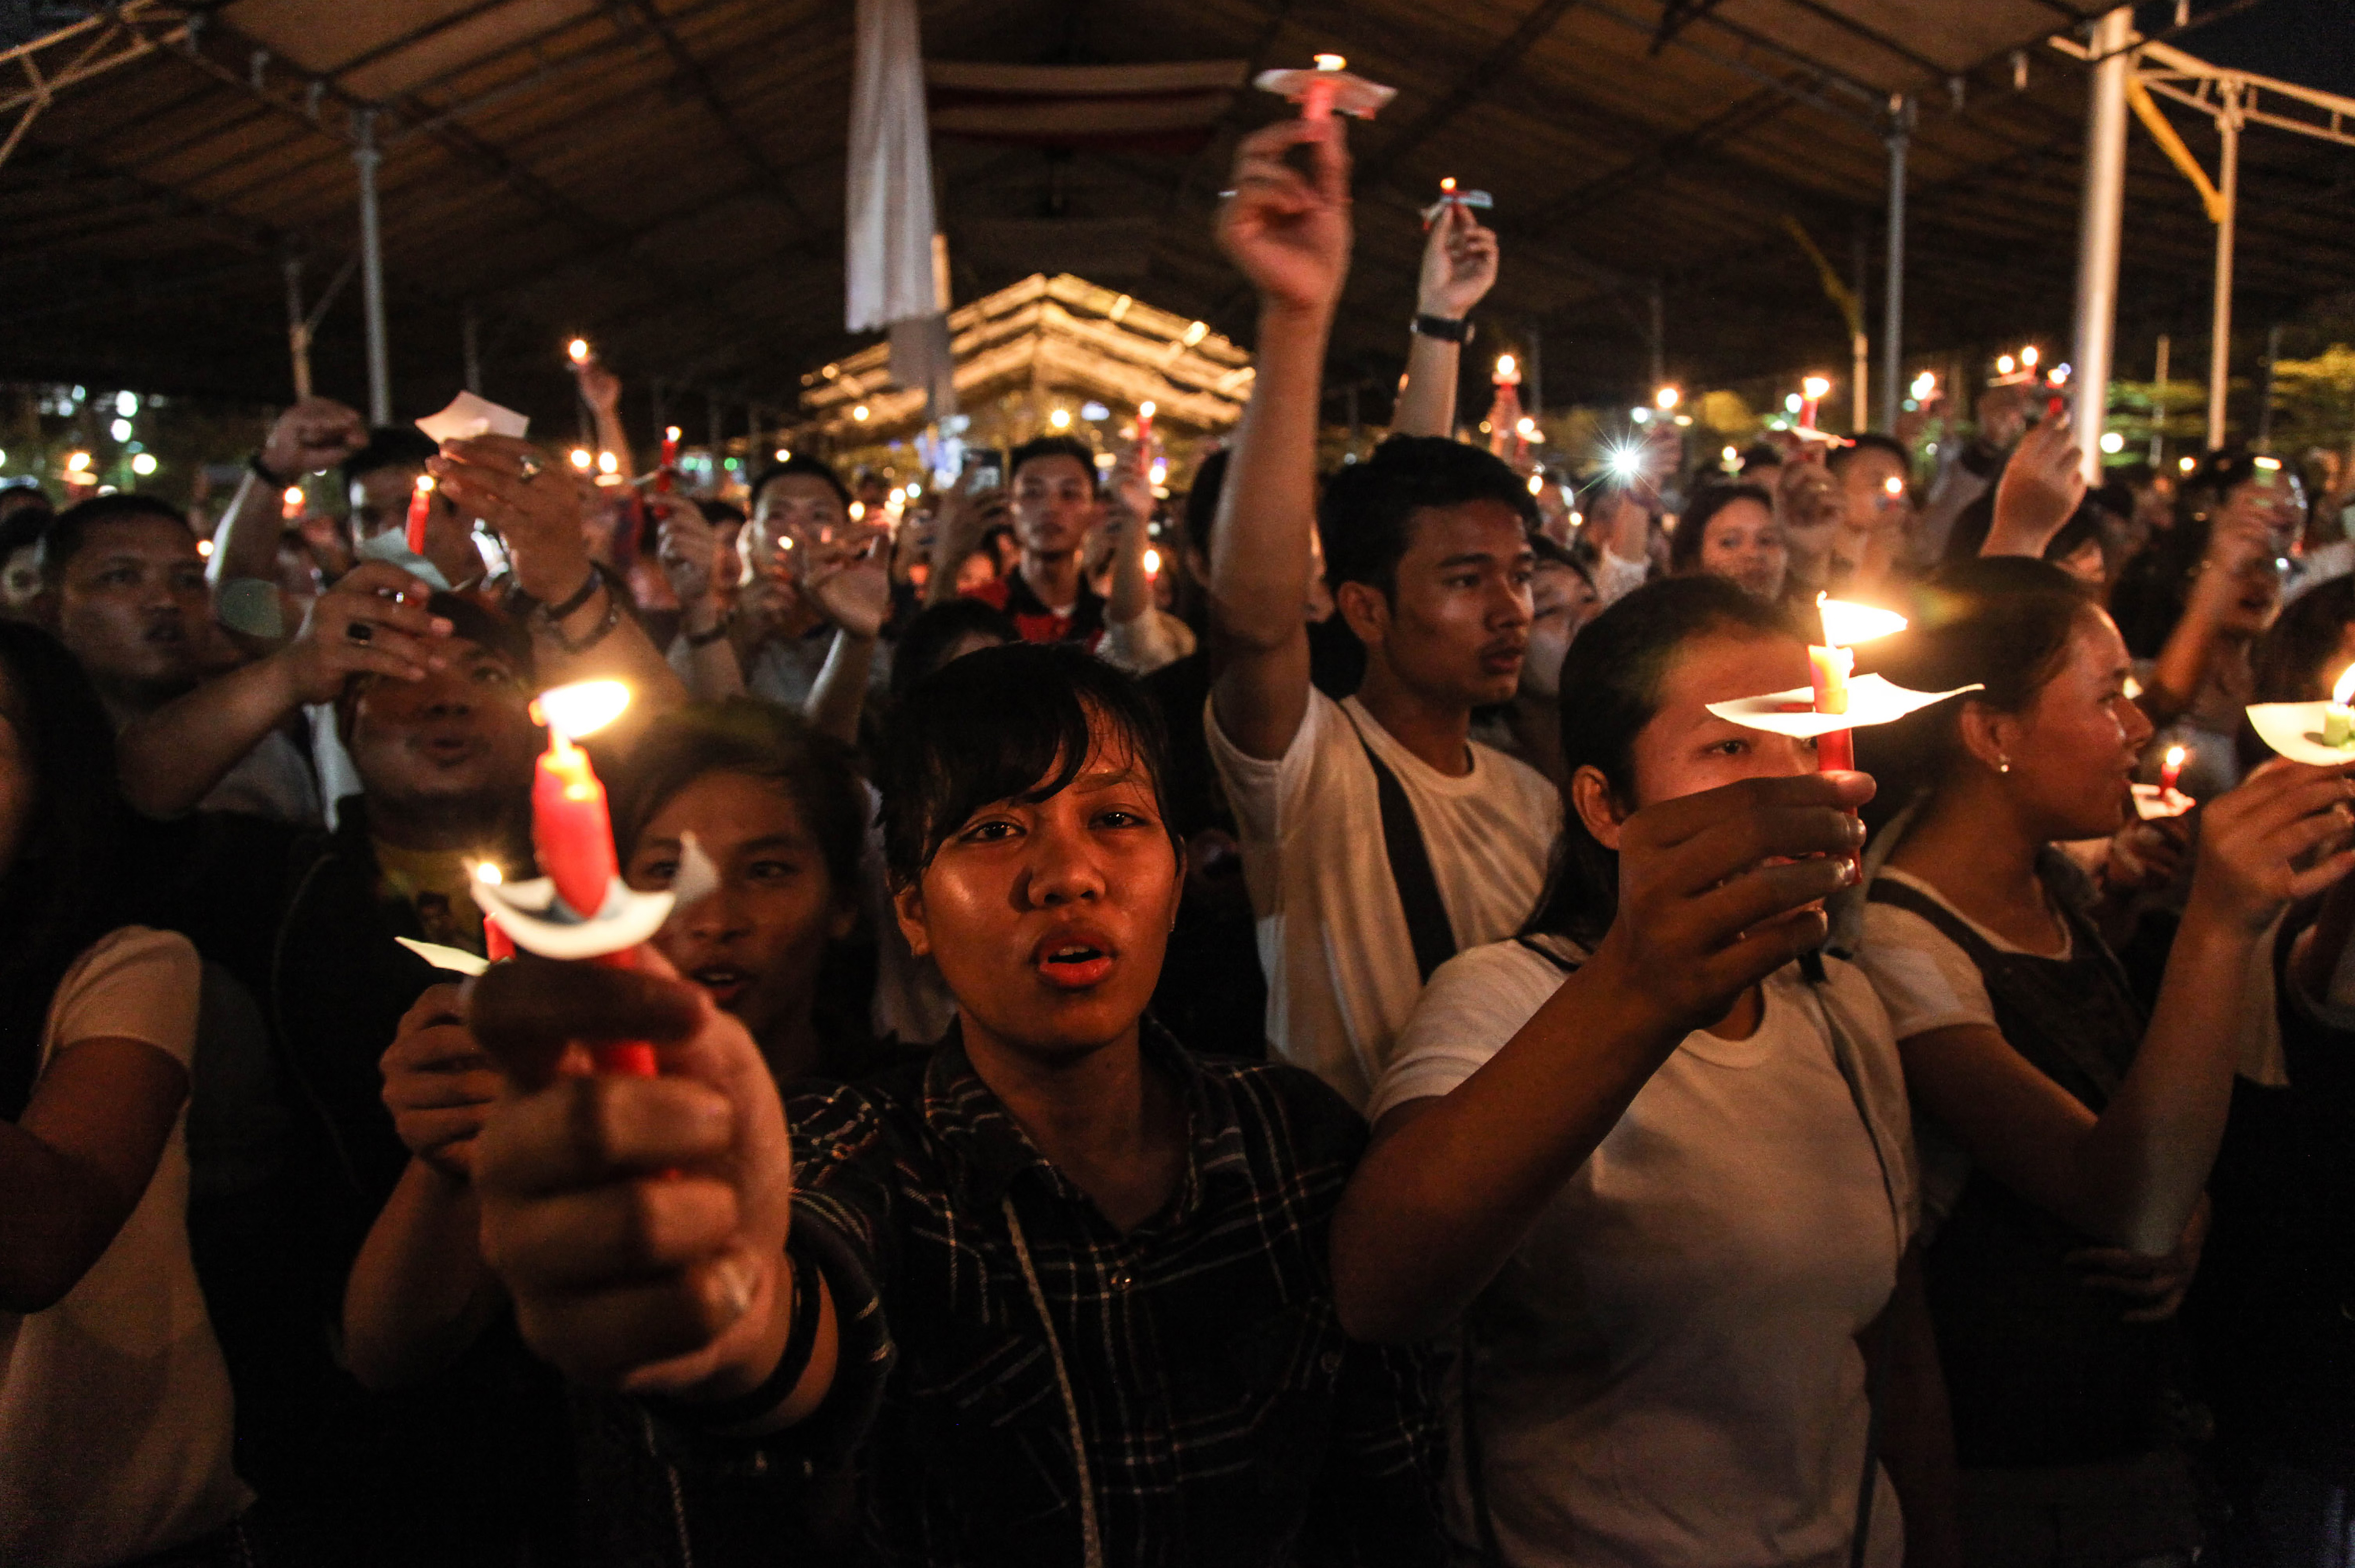 This picture taken on May 13, 2018 shows a candlelight vigil in the city of Medan on Indonesia's Sumatra island to support the victims and their relatives of a series attacks at churches in Surabaya, East Java. (Ivan Damanik—AFP/Getty Images)